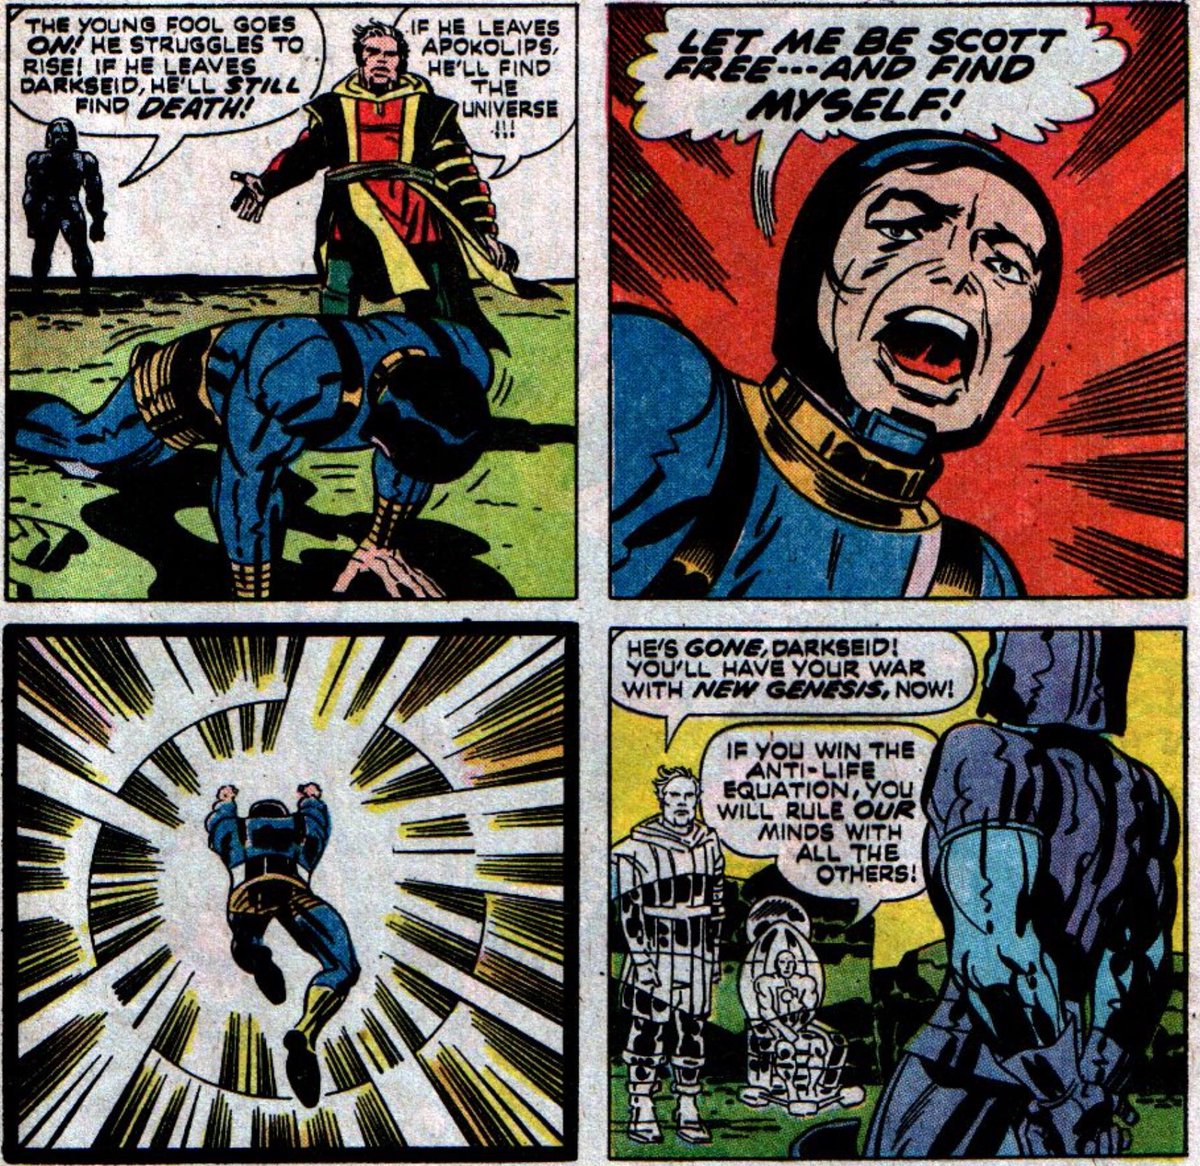 Scott and Barda eacaping, and while Barda doesn’t physically escape she is very much free of darkseid’s system at this point, is explicitly the start of Darkseid’s war with New Genesis, and also the start of his undoing.